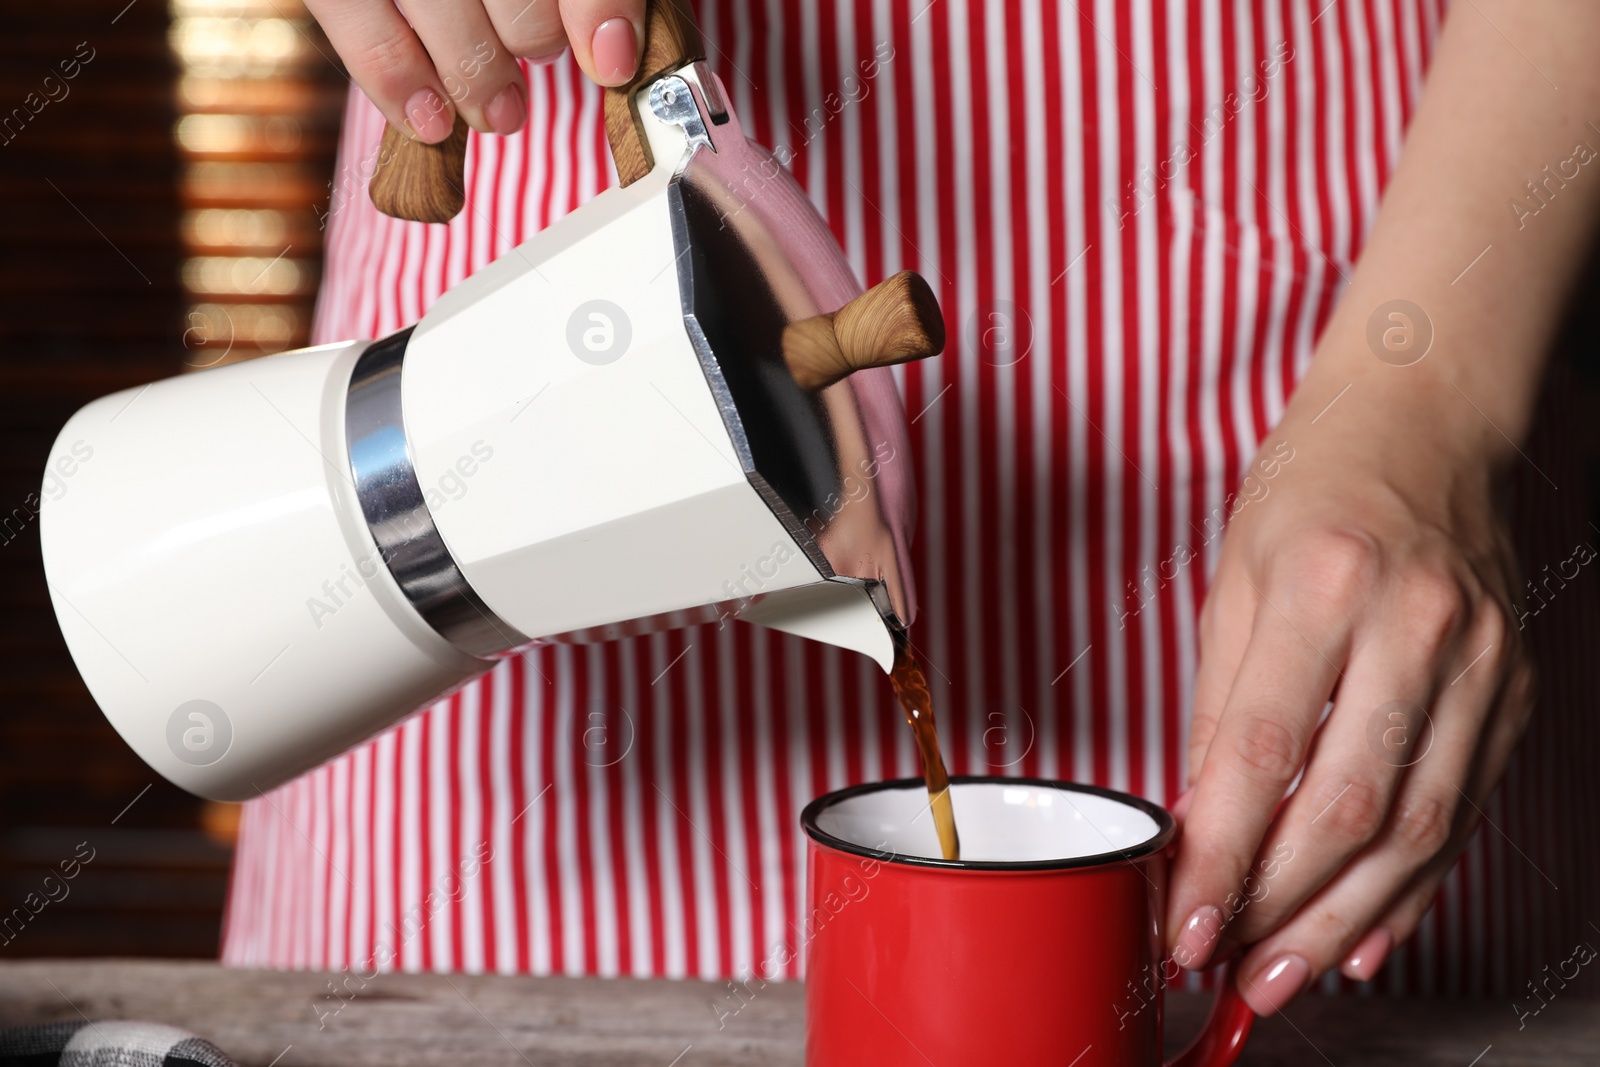 Photo of Woman pouring aromatic coffee from moka pot into cup at wooden table indoors, closeup